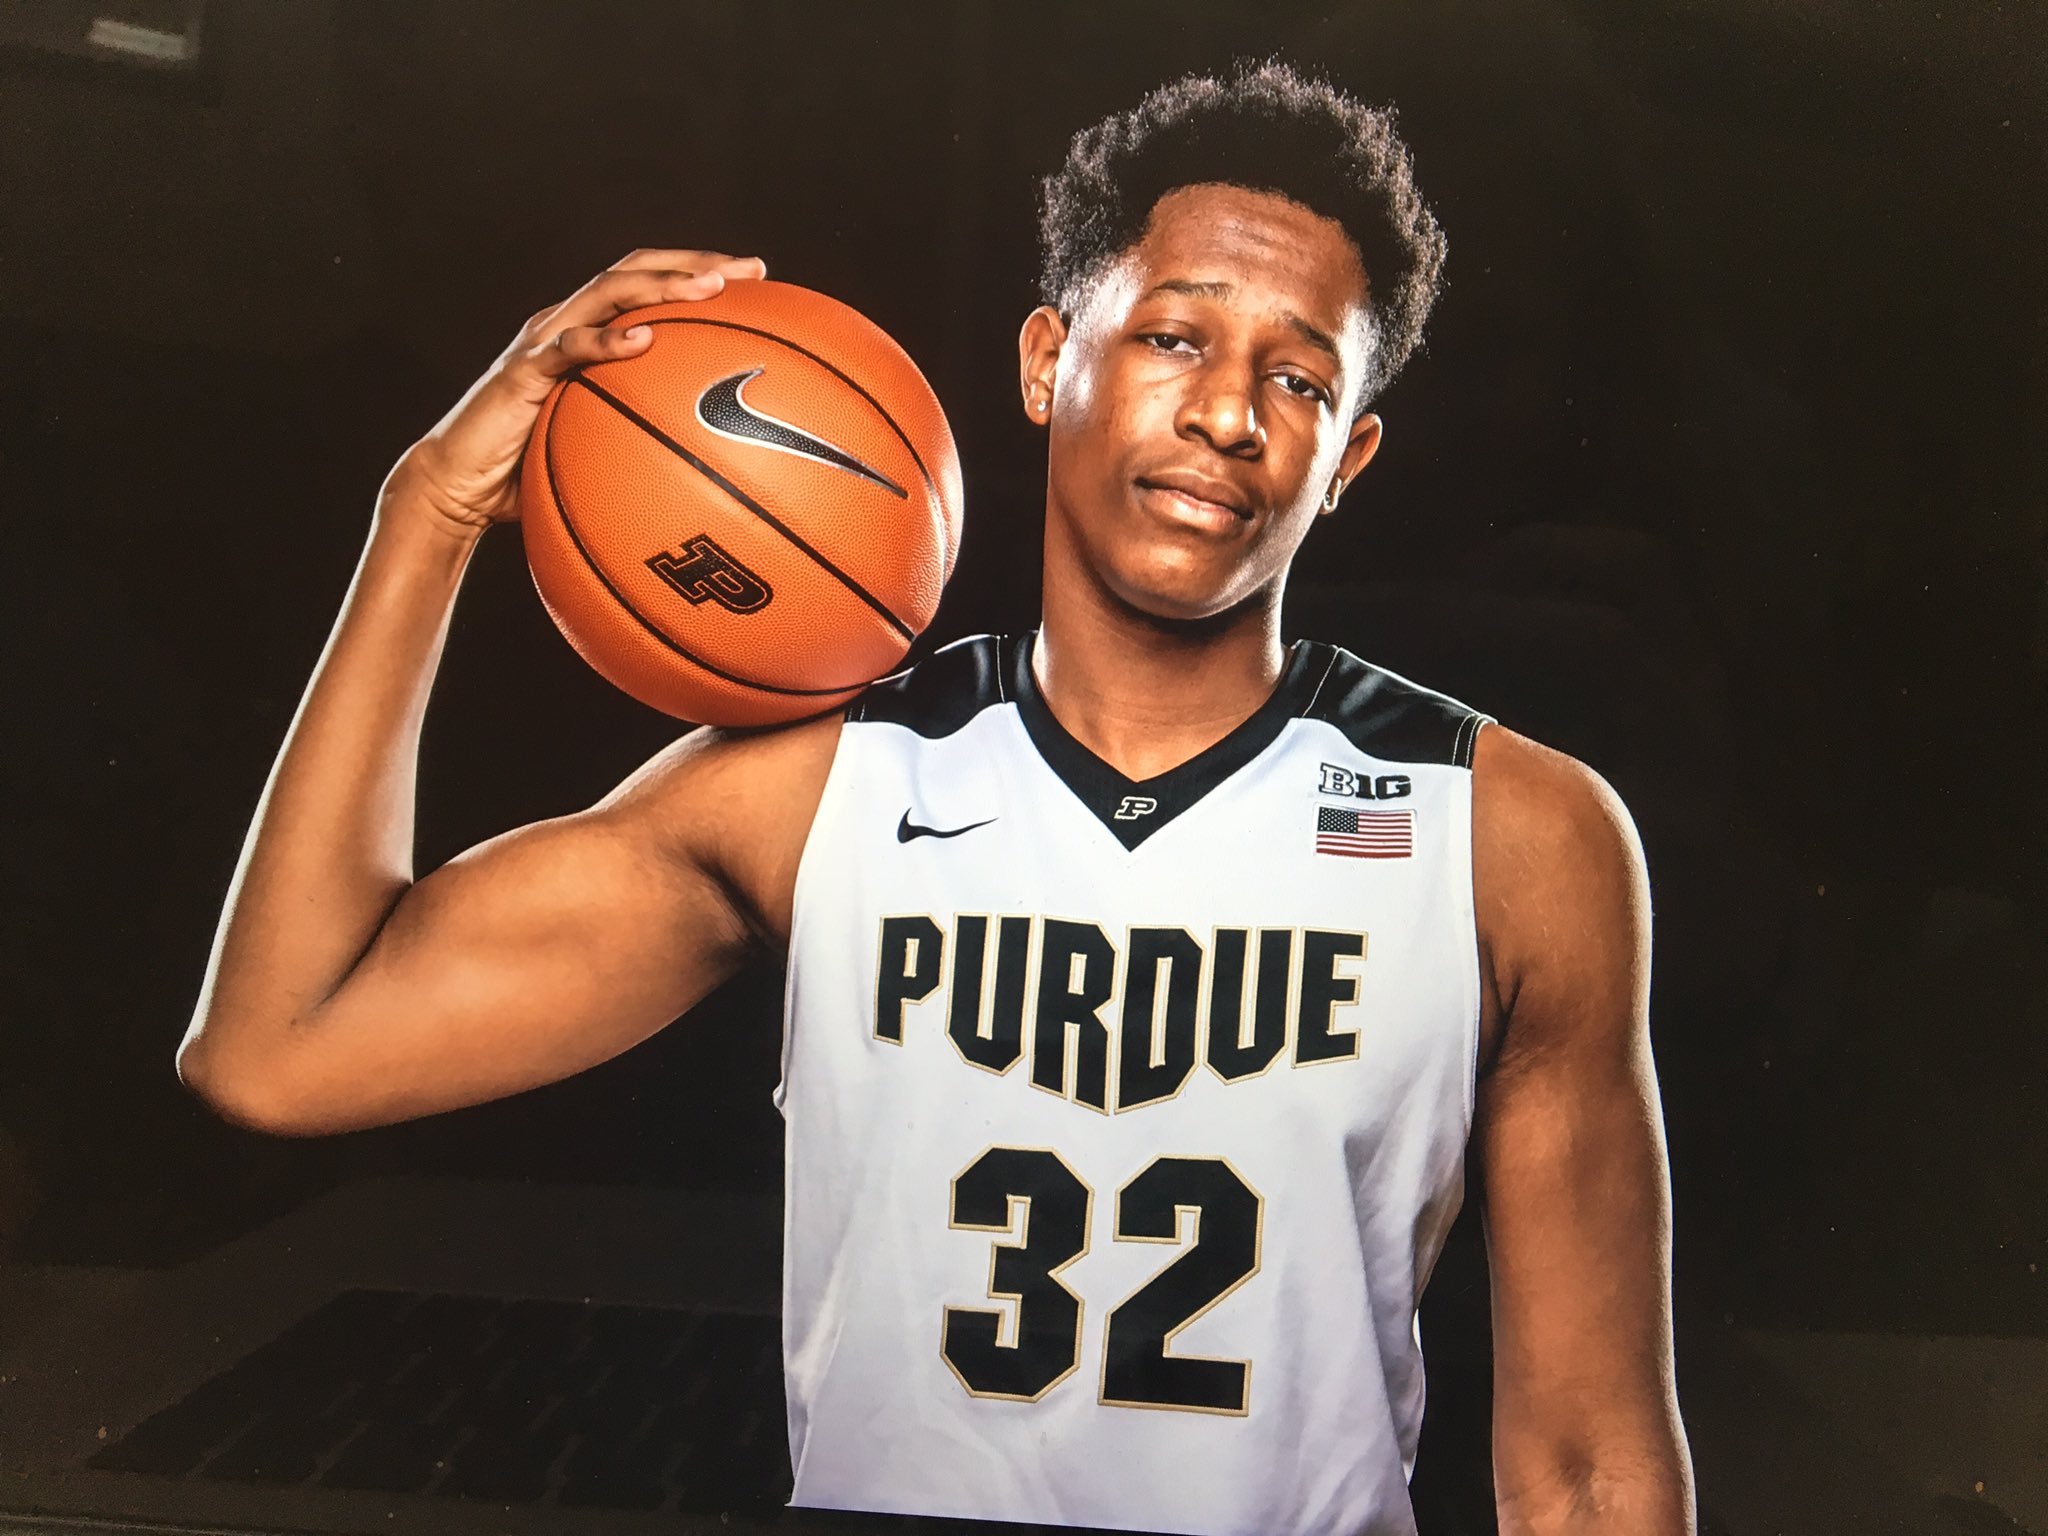 Sterling Manley on Twitter: "Photo shoot at Purdue today ...